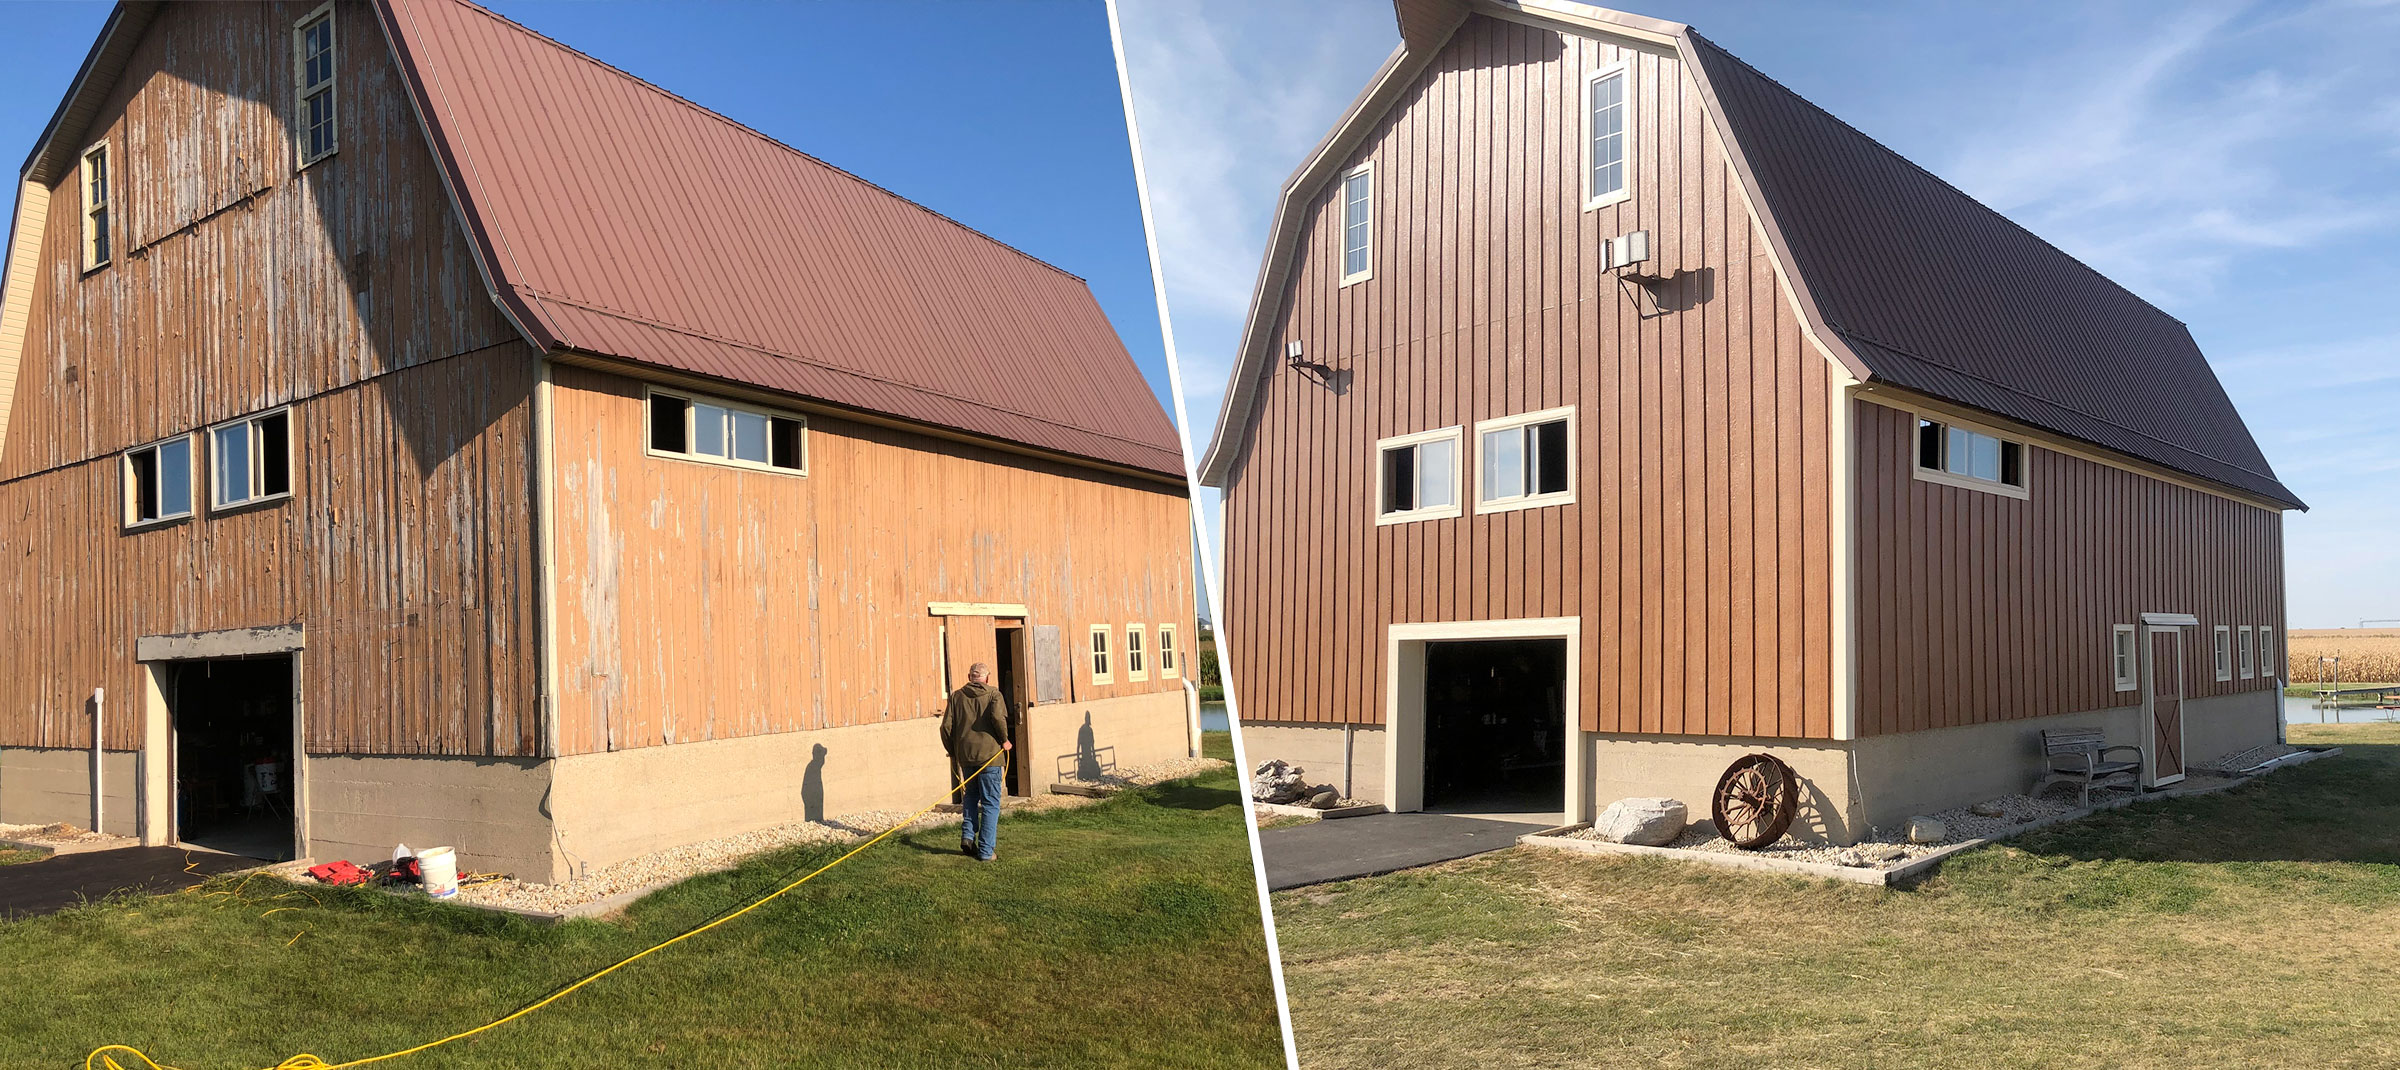 Before and After of Barn Restoration 